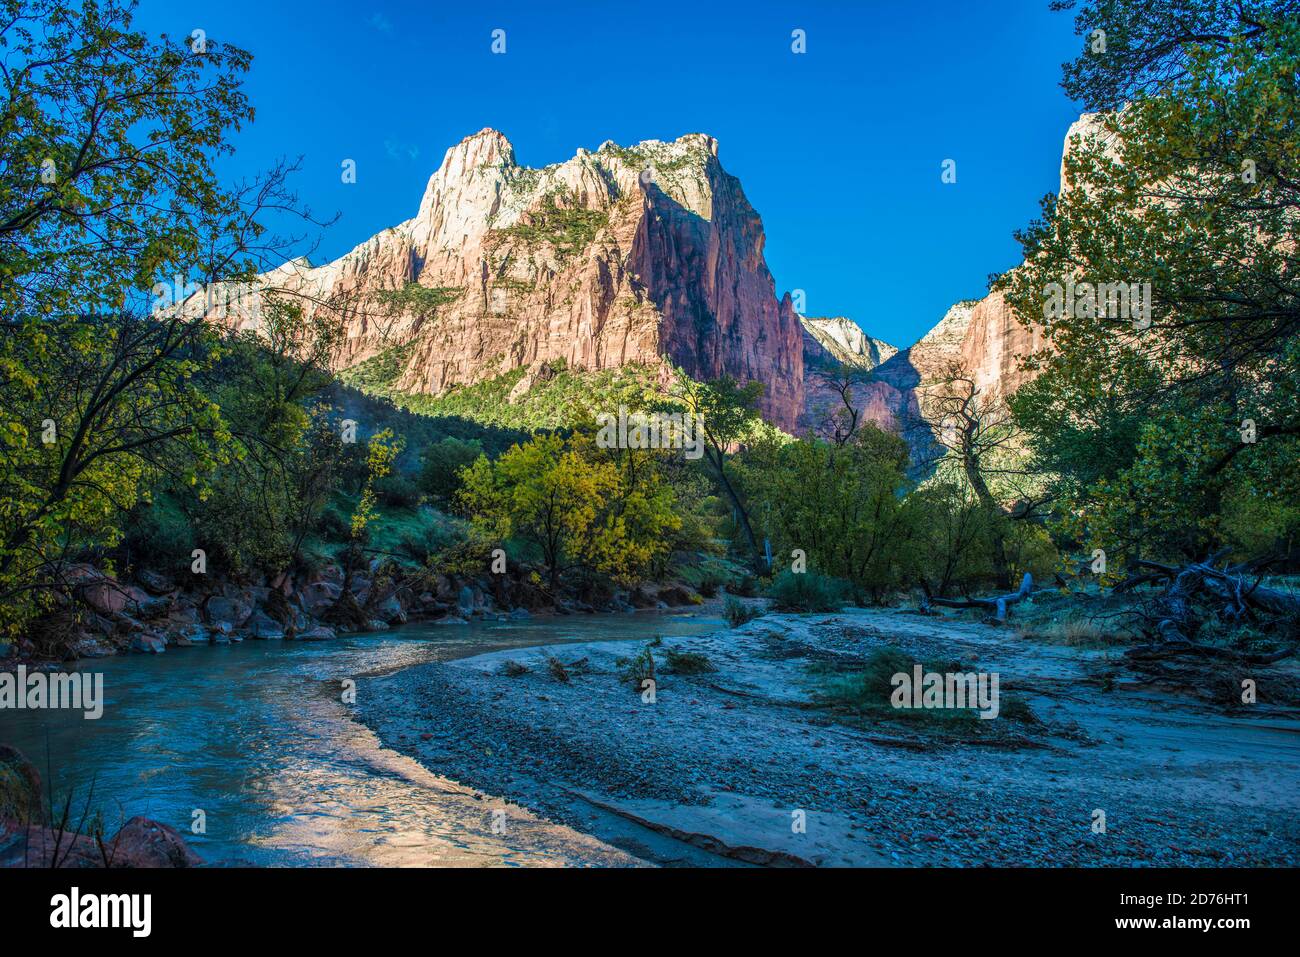 USA, ZION NATIONAL PARK, UTAH, Blick in den Hears Canyon entlang des Zion Canyon Scenic Drive in Richtung Lady Mountain und Castle Dome Stockfoto